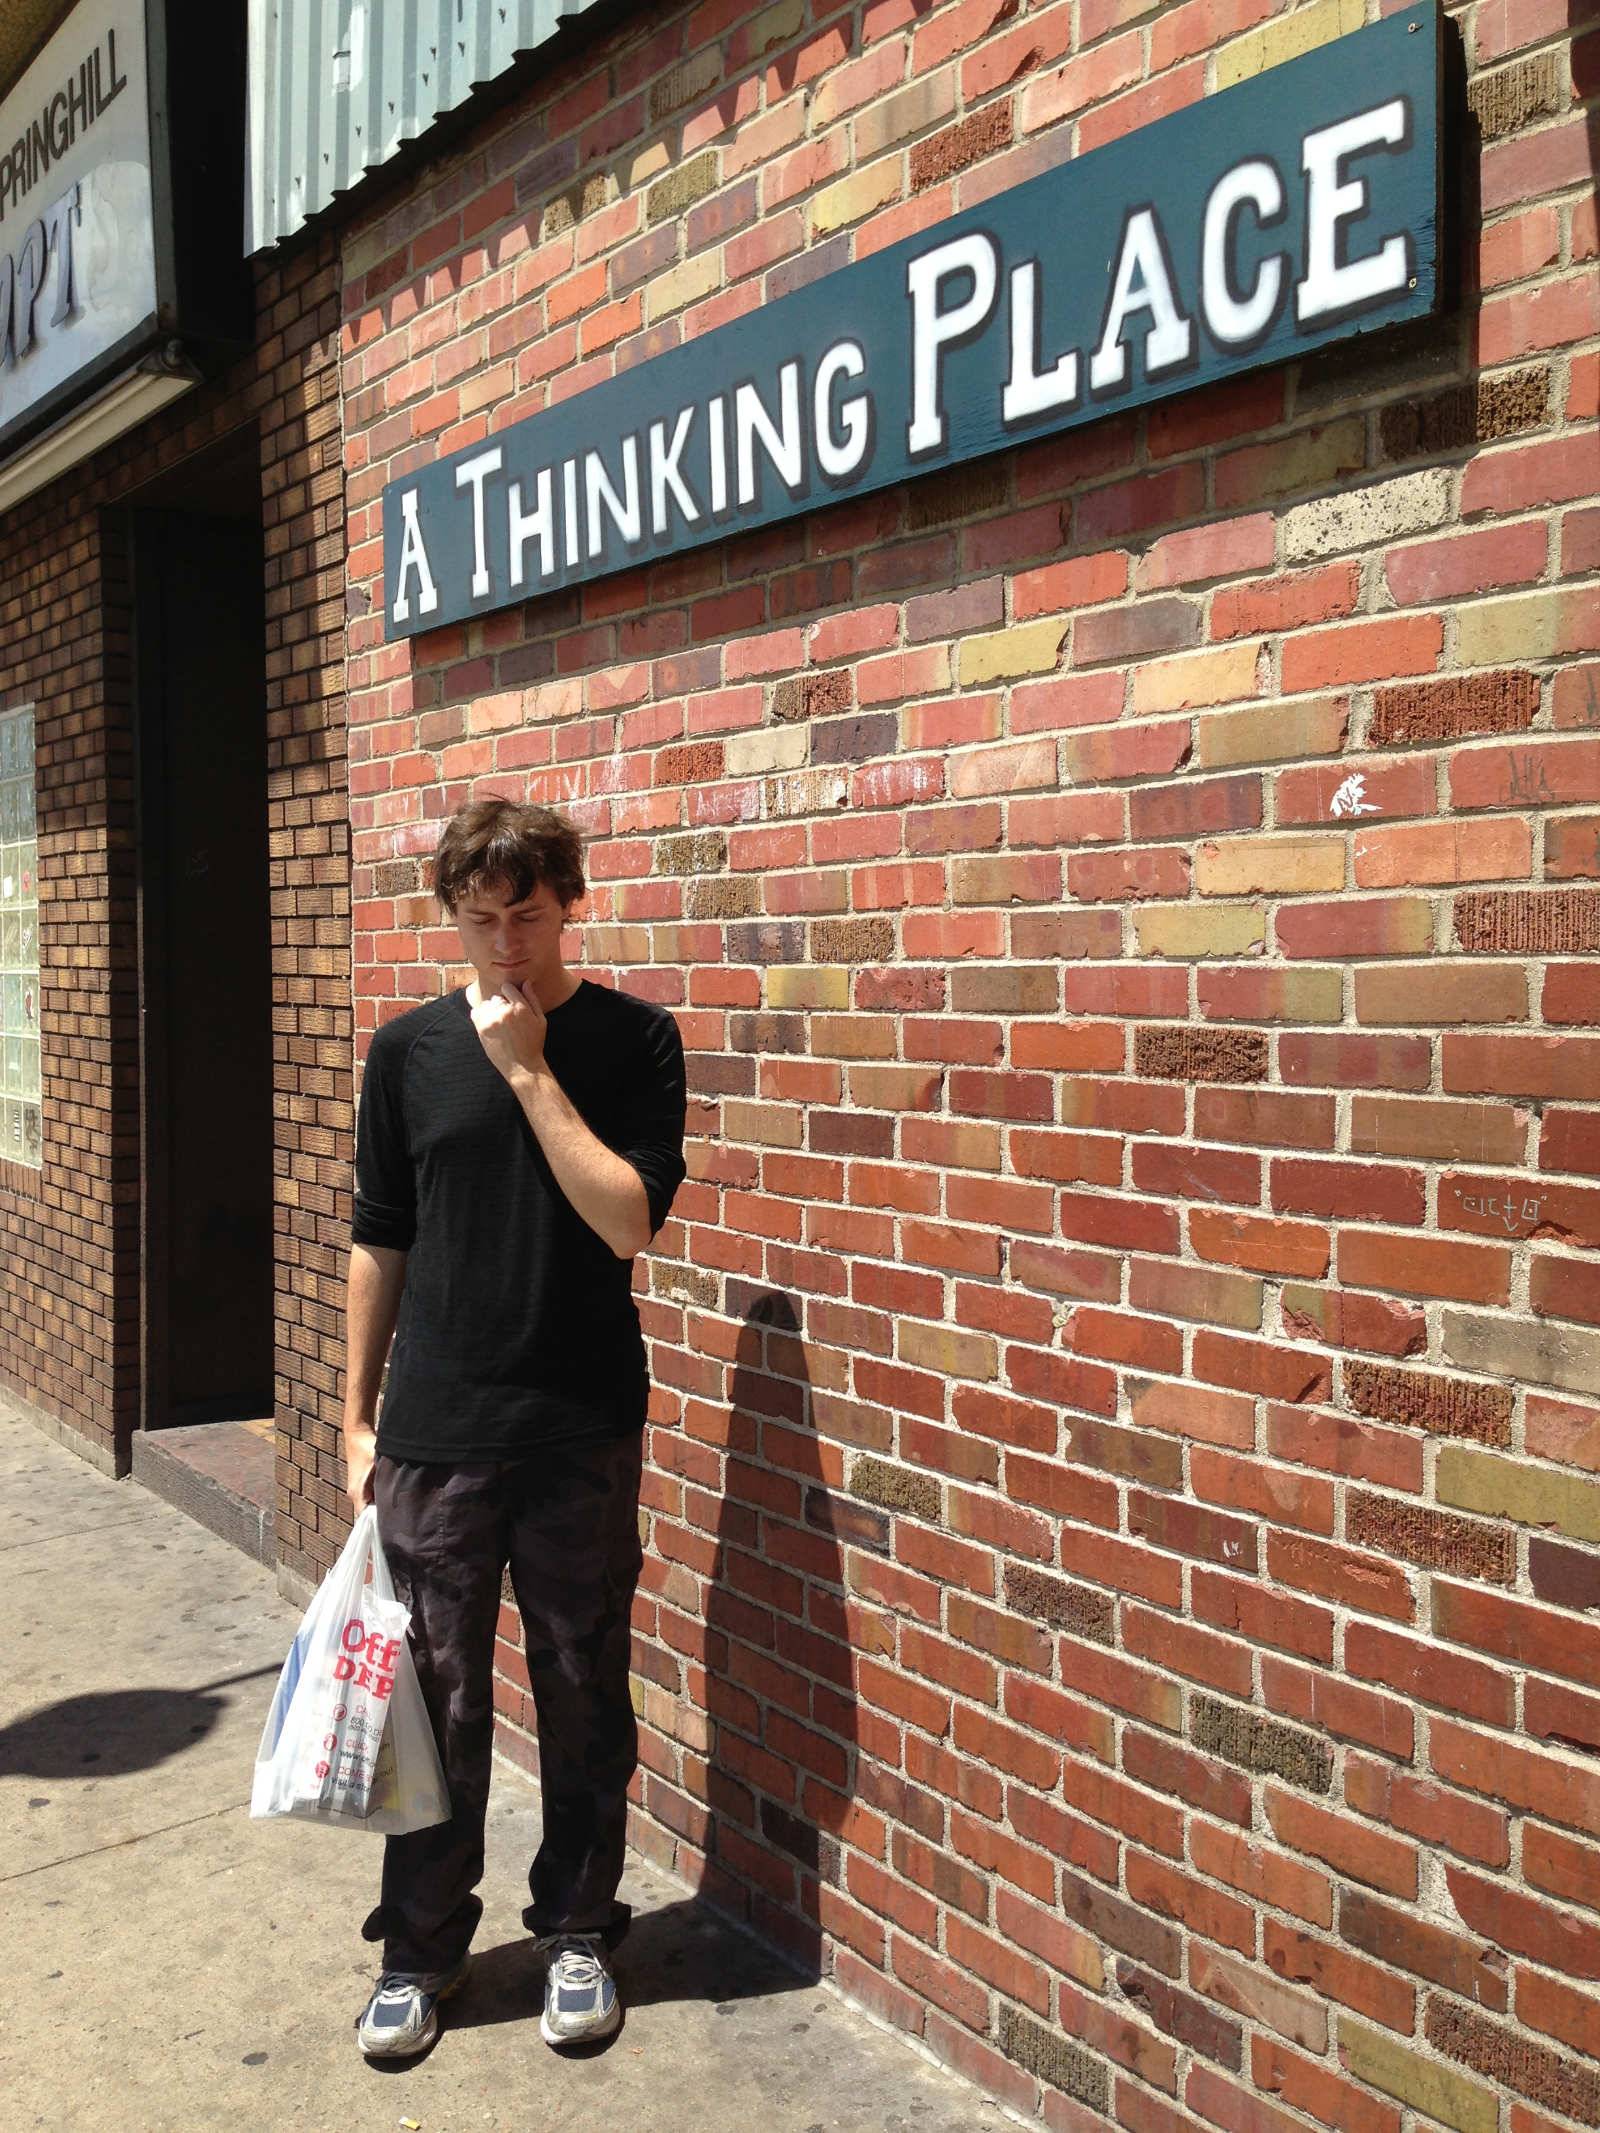 Richard outside a store called “A Thinking Place”